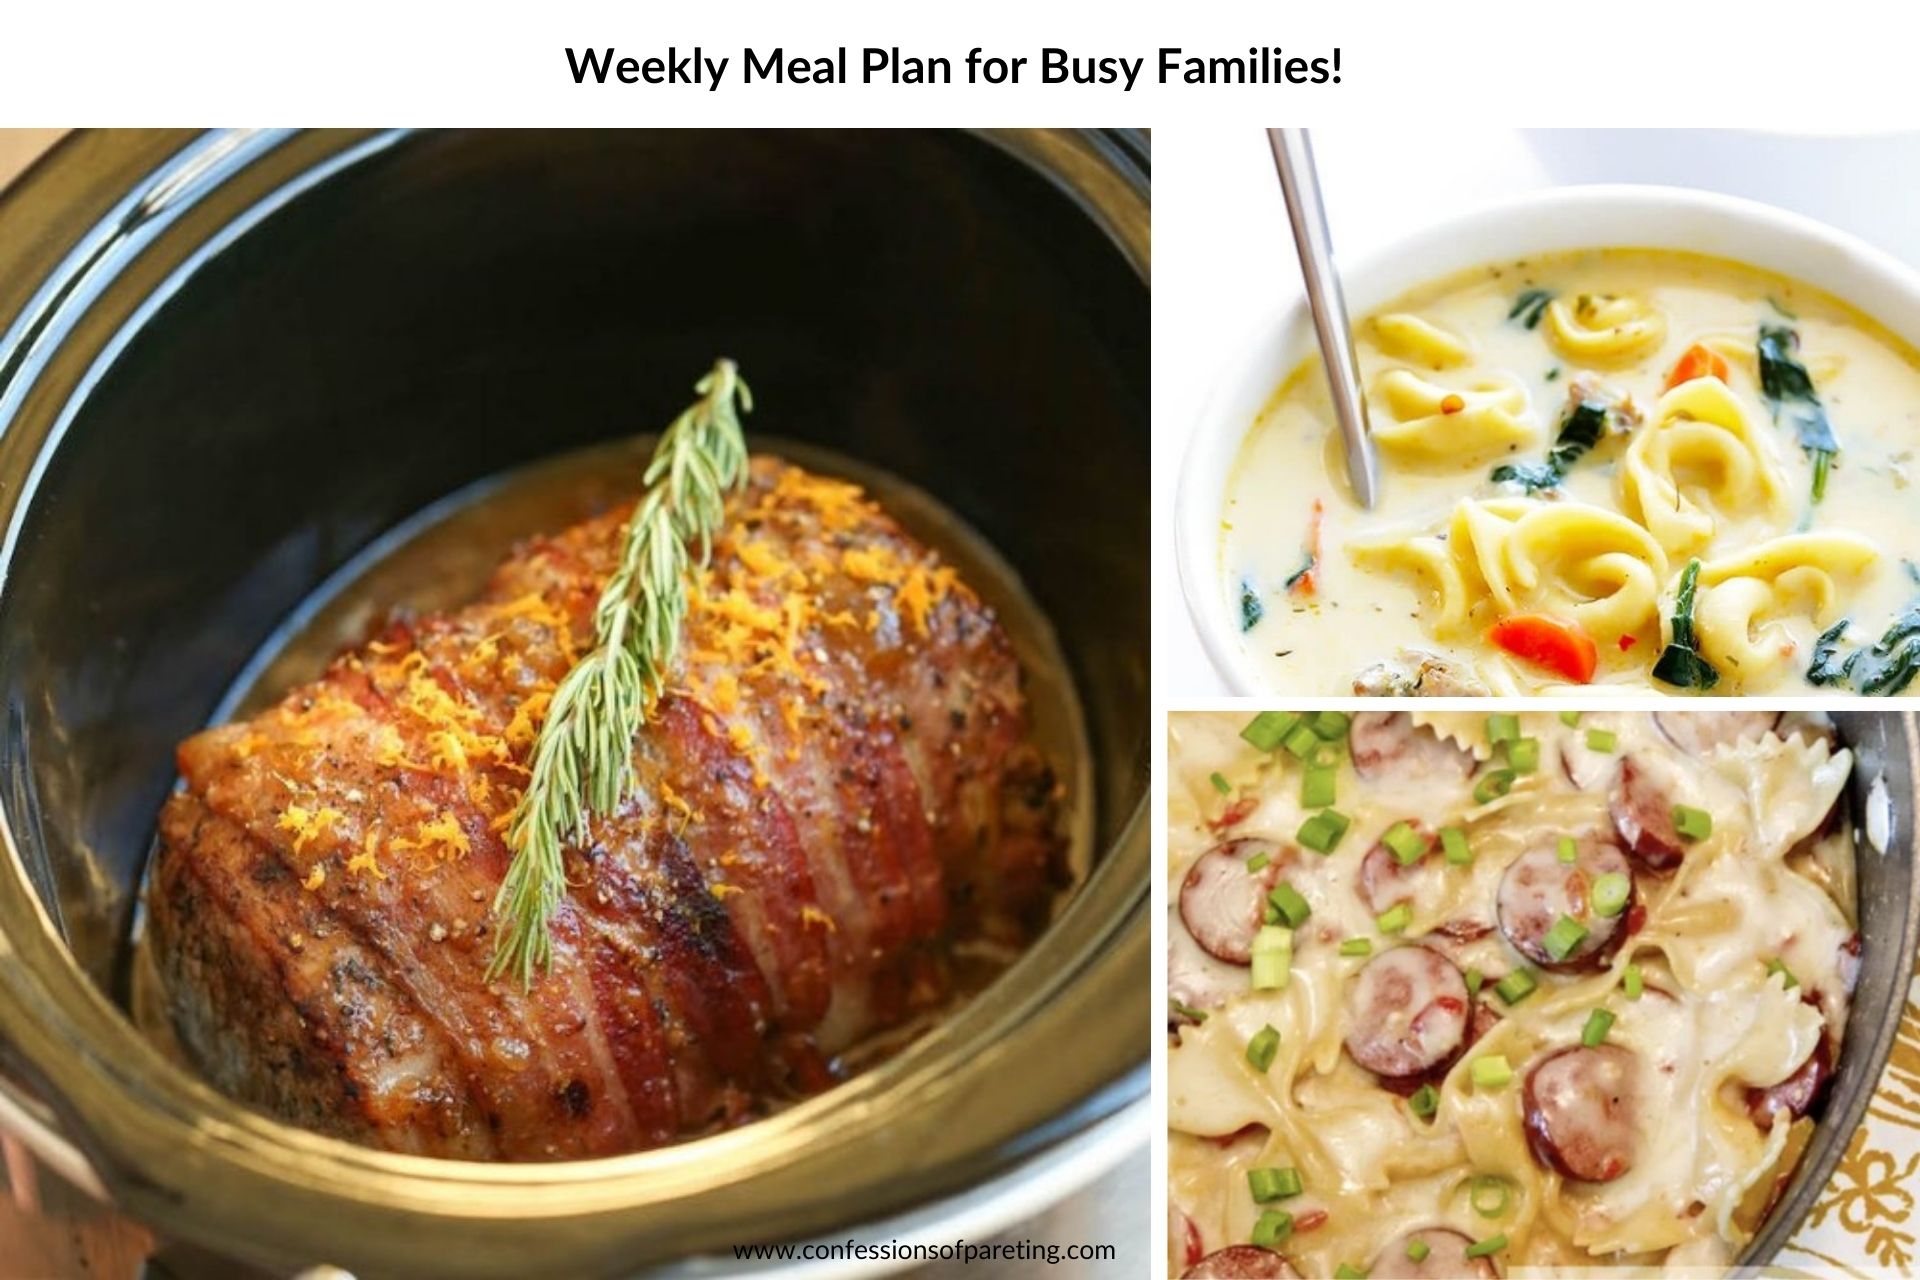 Weekly Meal Plan for Busy Families! (Even You Can Make!)